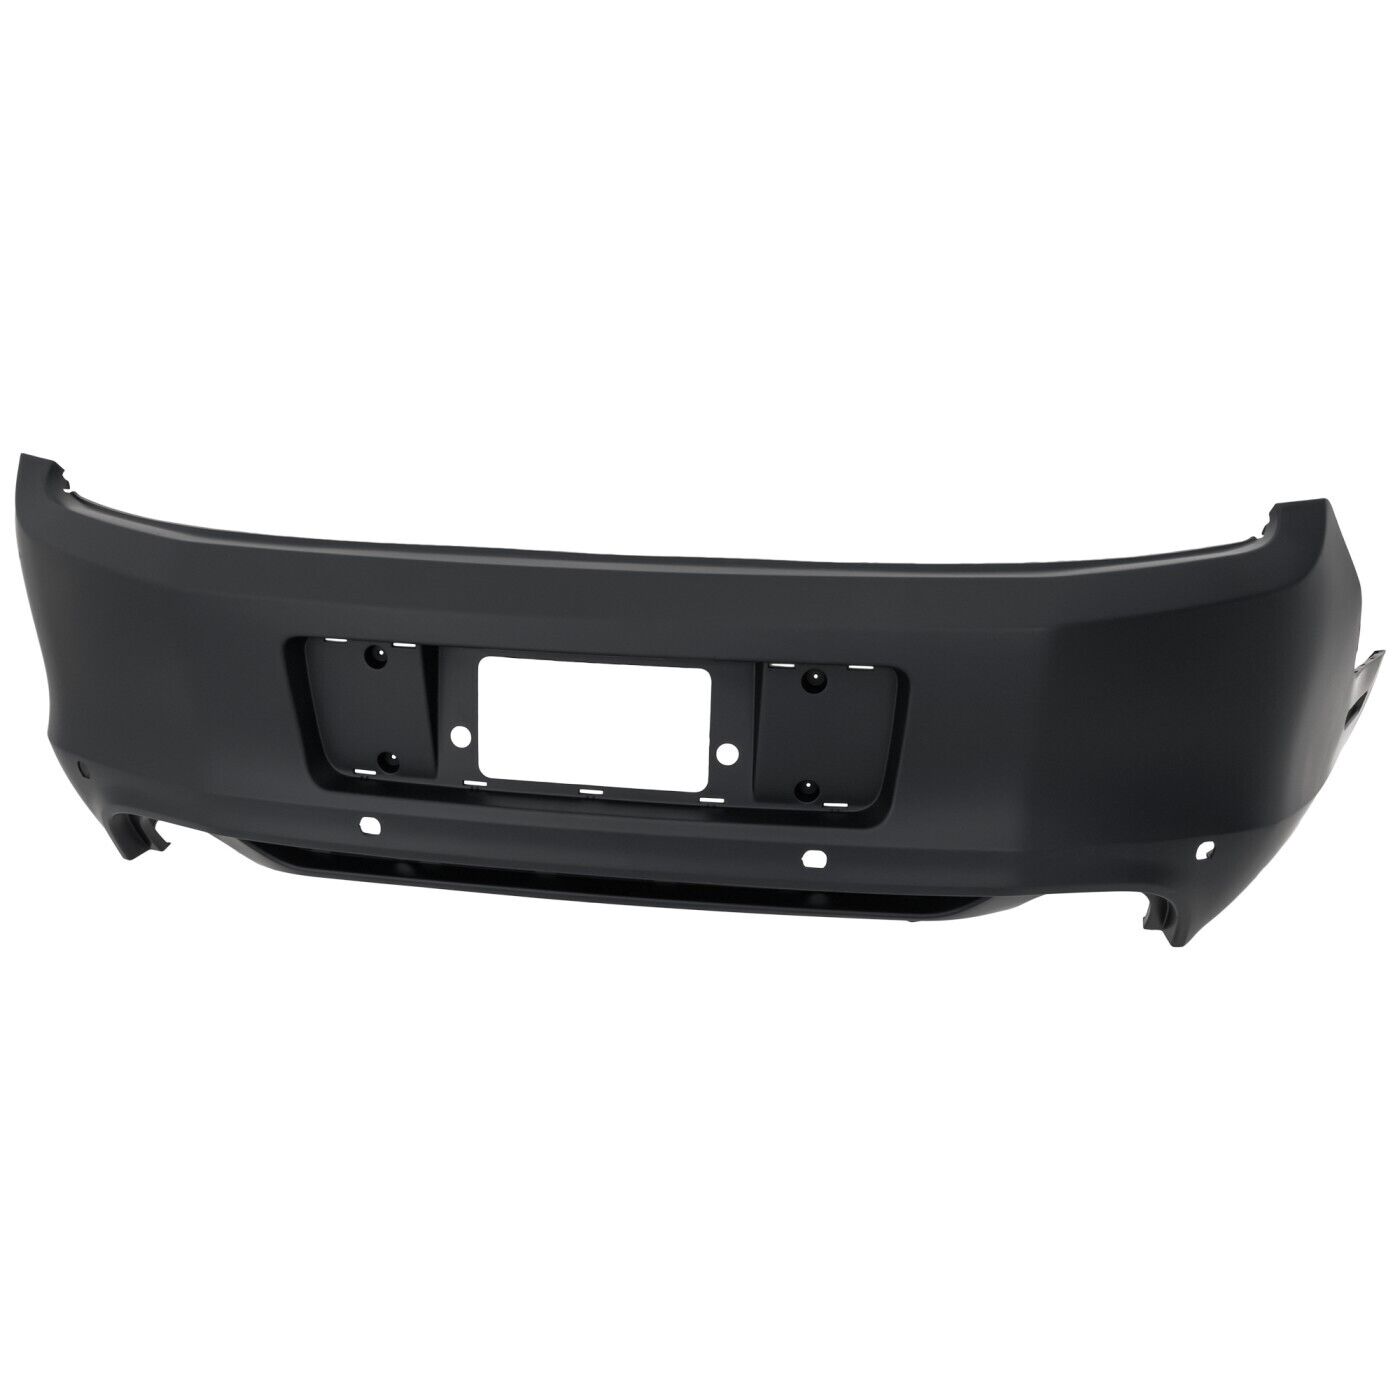 Bumper Cover For 2013-2014 Ford Mustang Base GT With Sensor Holes Rear Primed